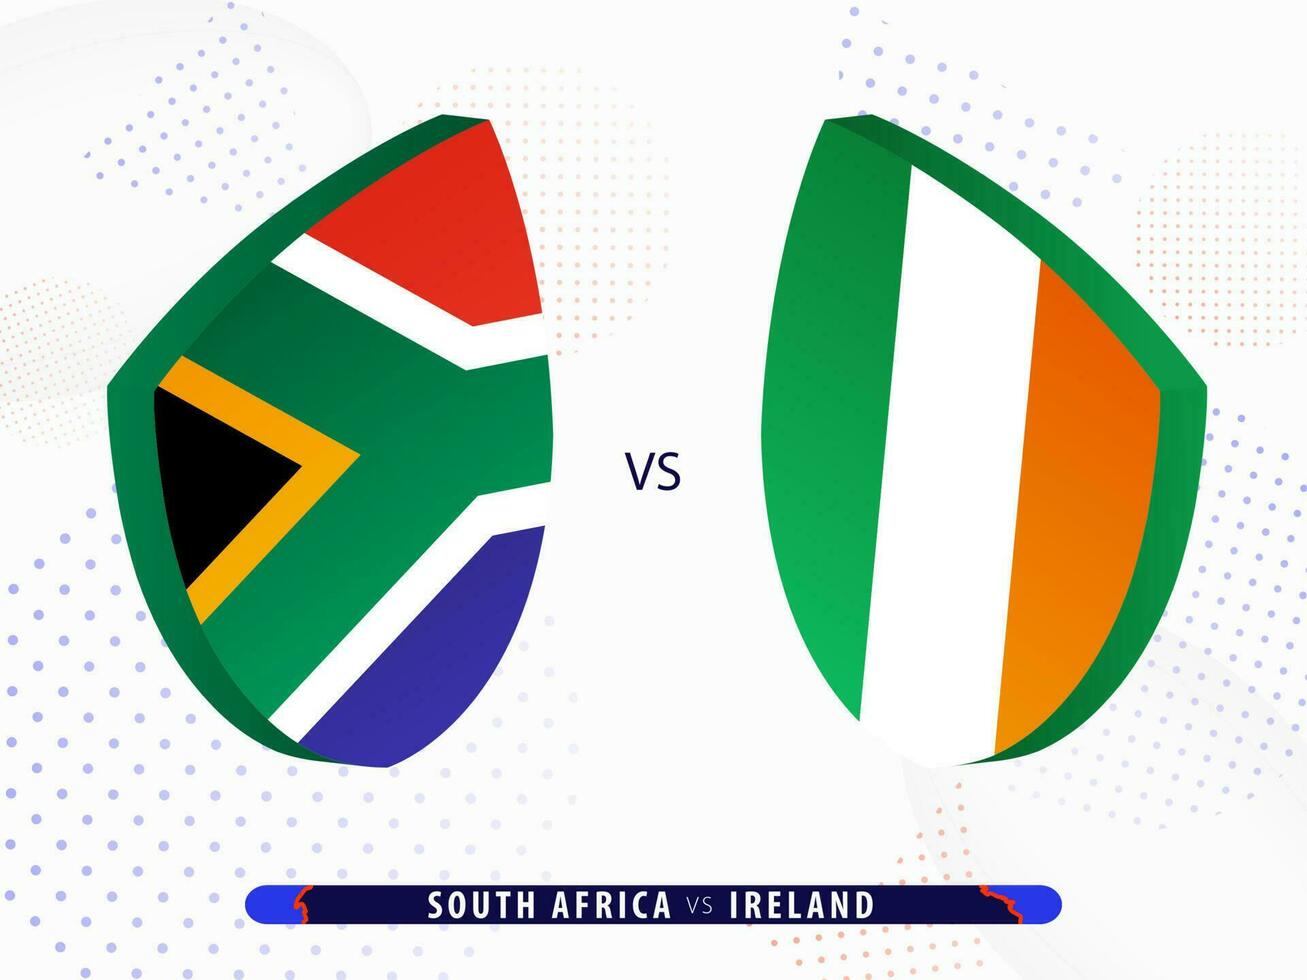 South Africa vs Ireland rugby match, international rugby competition 2023. vector